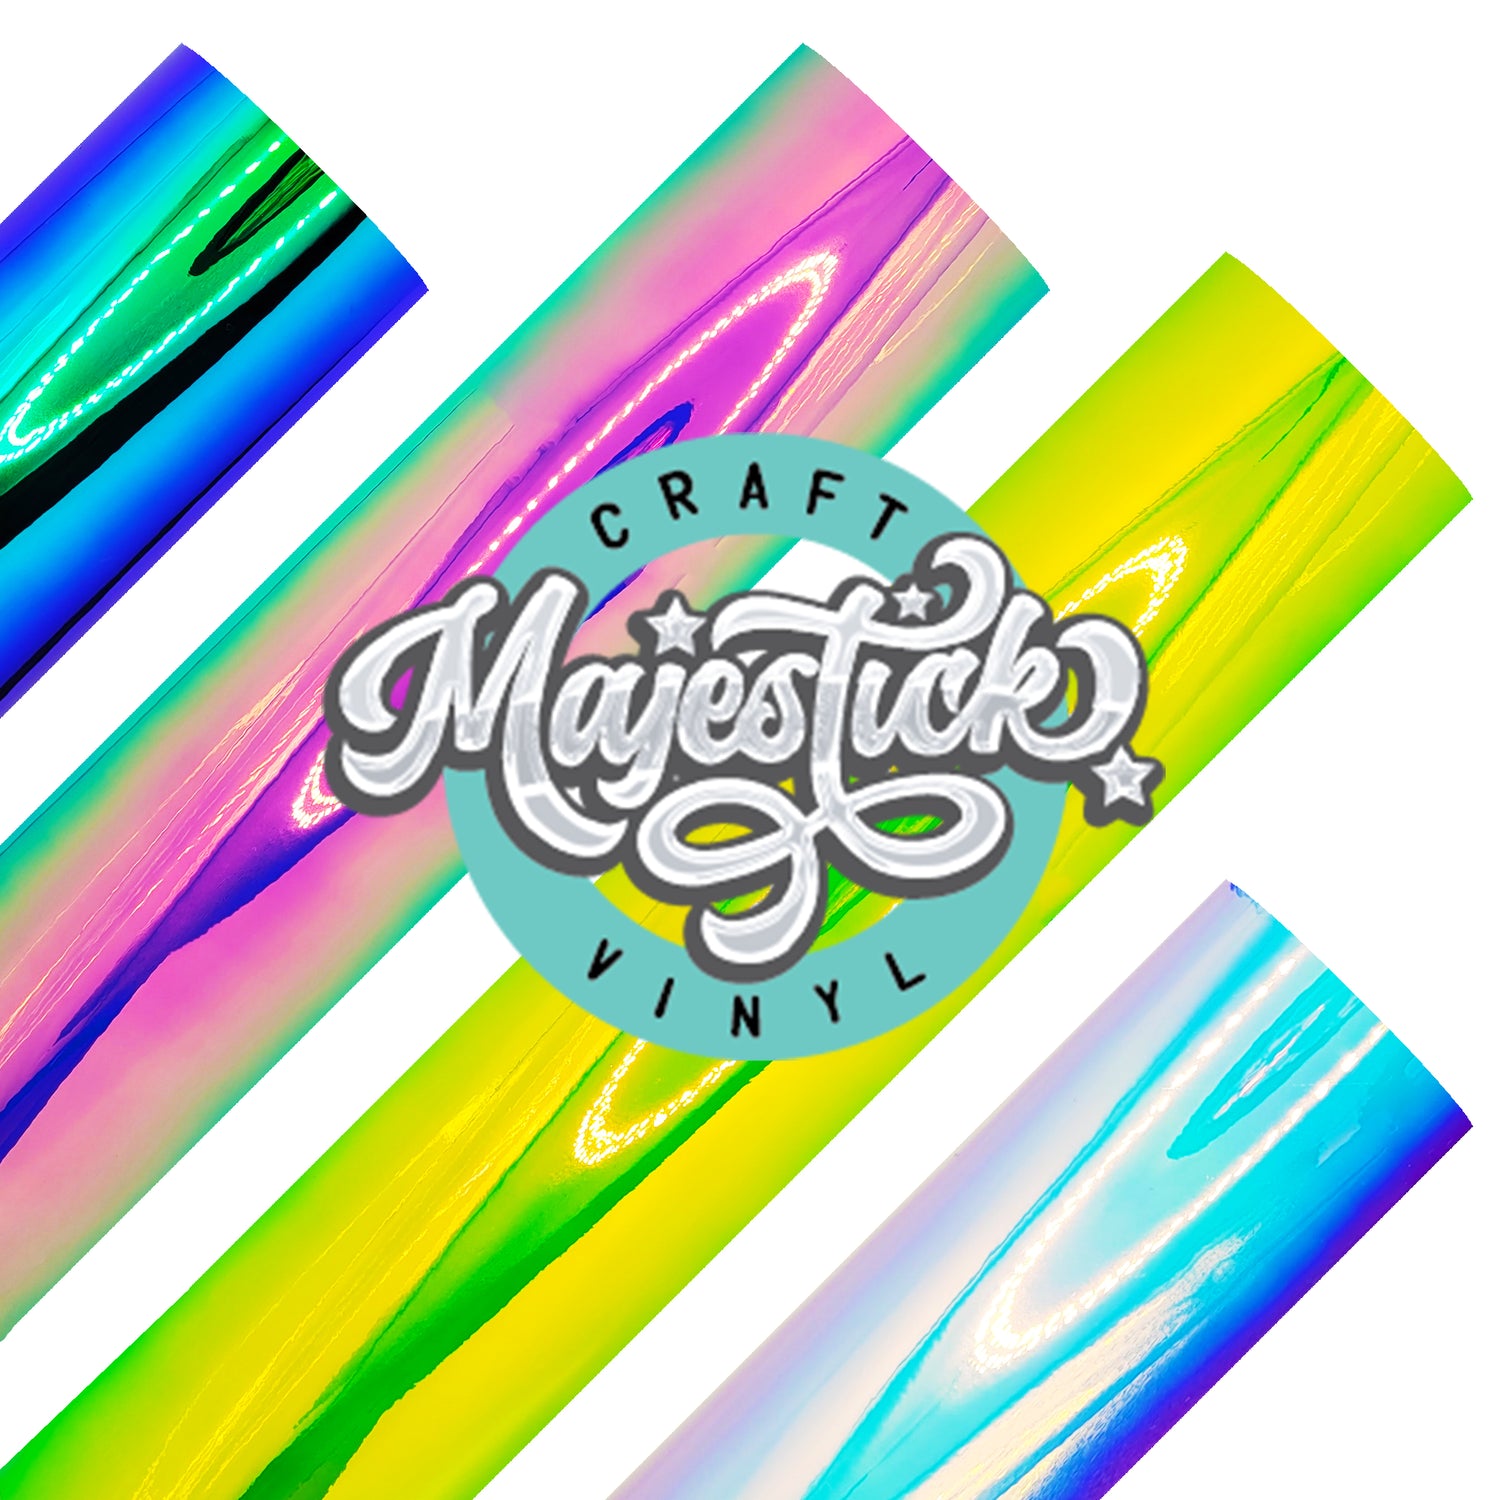 How to Craft with TeckWrapCraft Holographic Printable Sticker